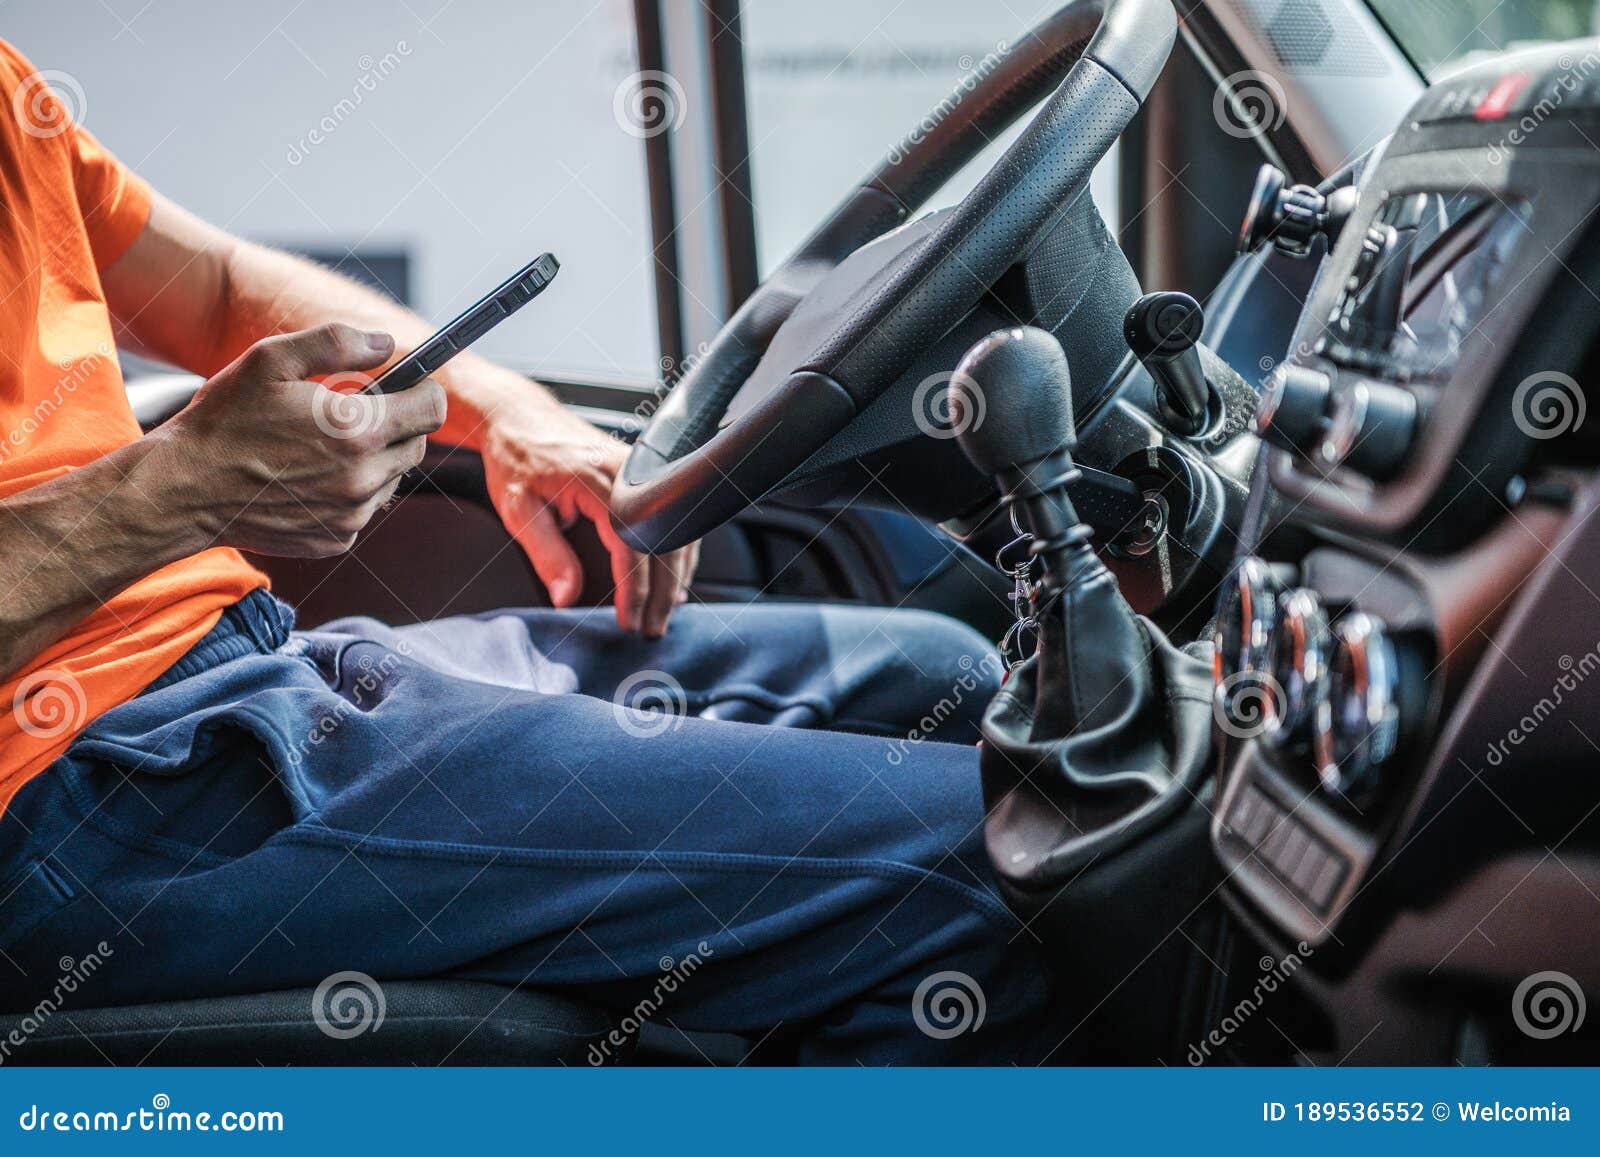 delivery truck driver browsing internet using his smartphone